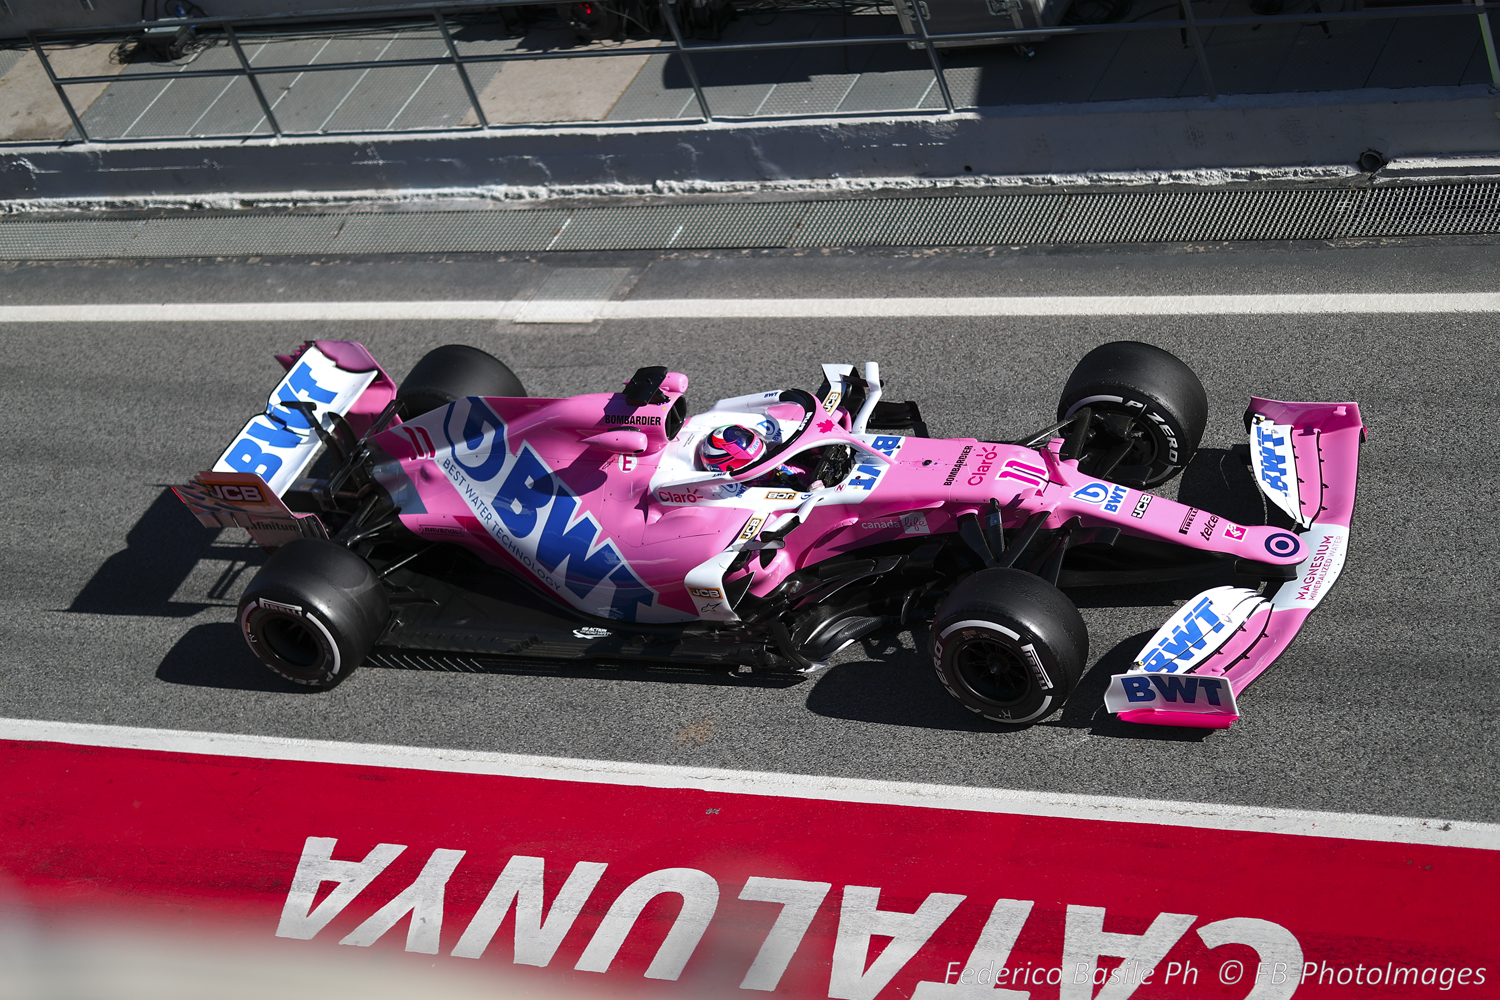 The 2020 Racing Point car appears to be last year's Mercedes painted pink, i.e. an exact duplicate.